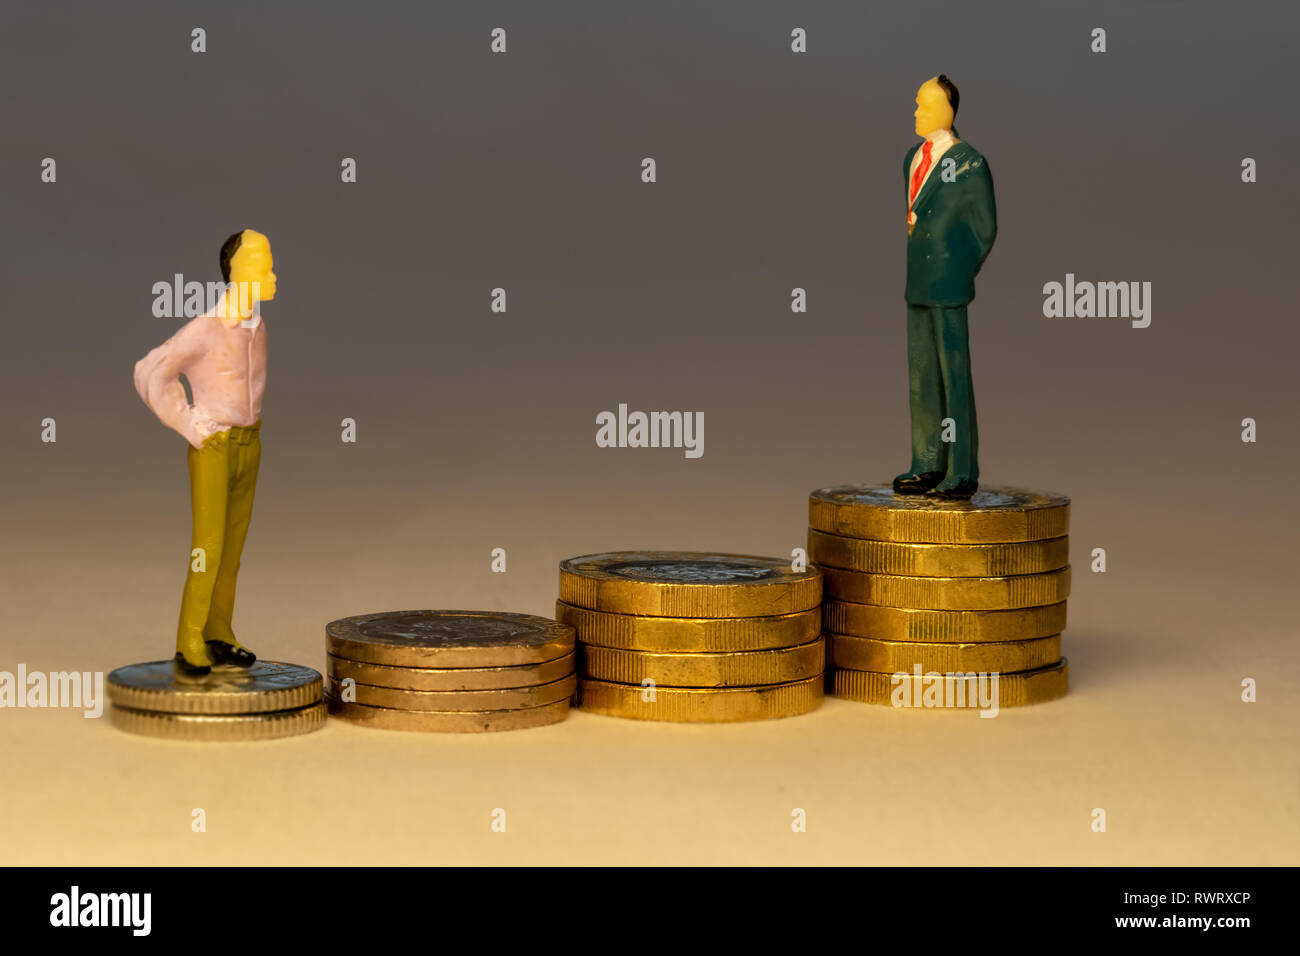 Man looking to business man standing on top of increasing piles of gold coins. Business career concept. Stock Photo